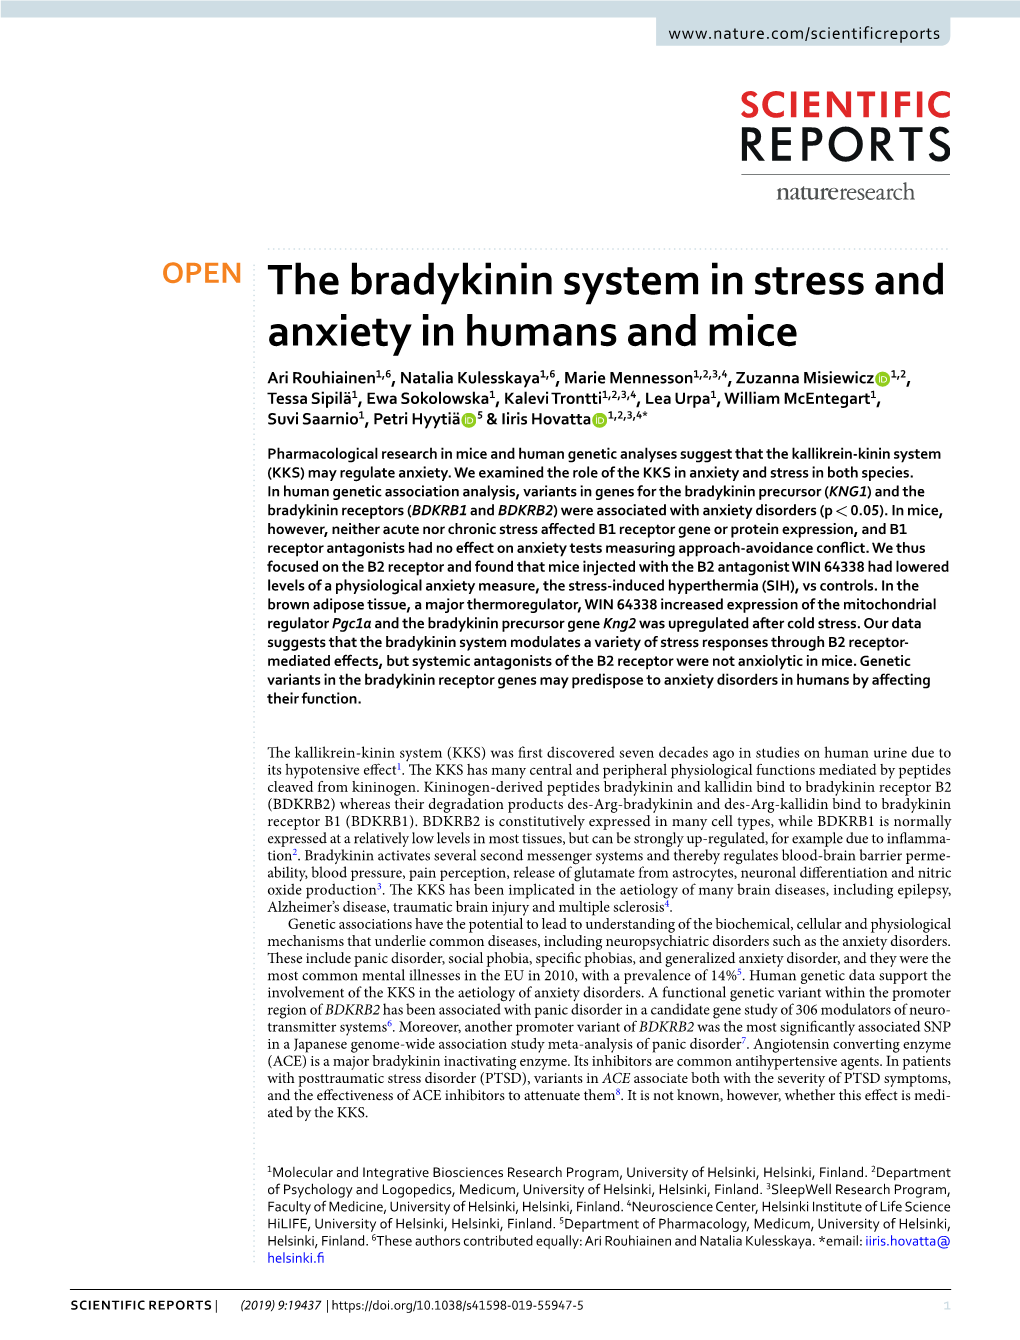 The Bradykinin System in Stress and Anxiety in Humans and Mice